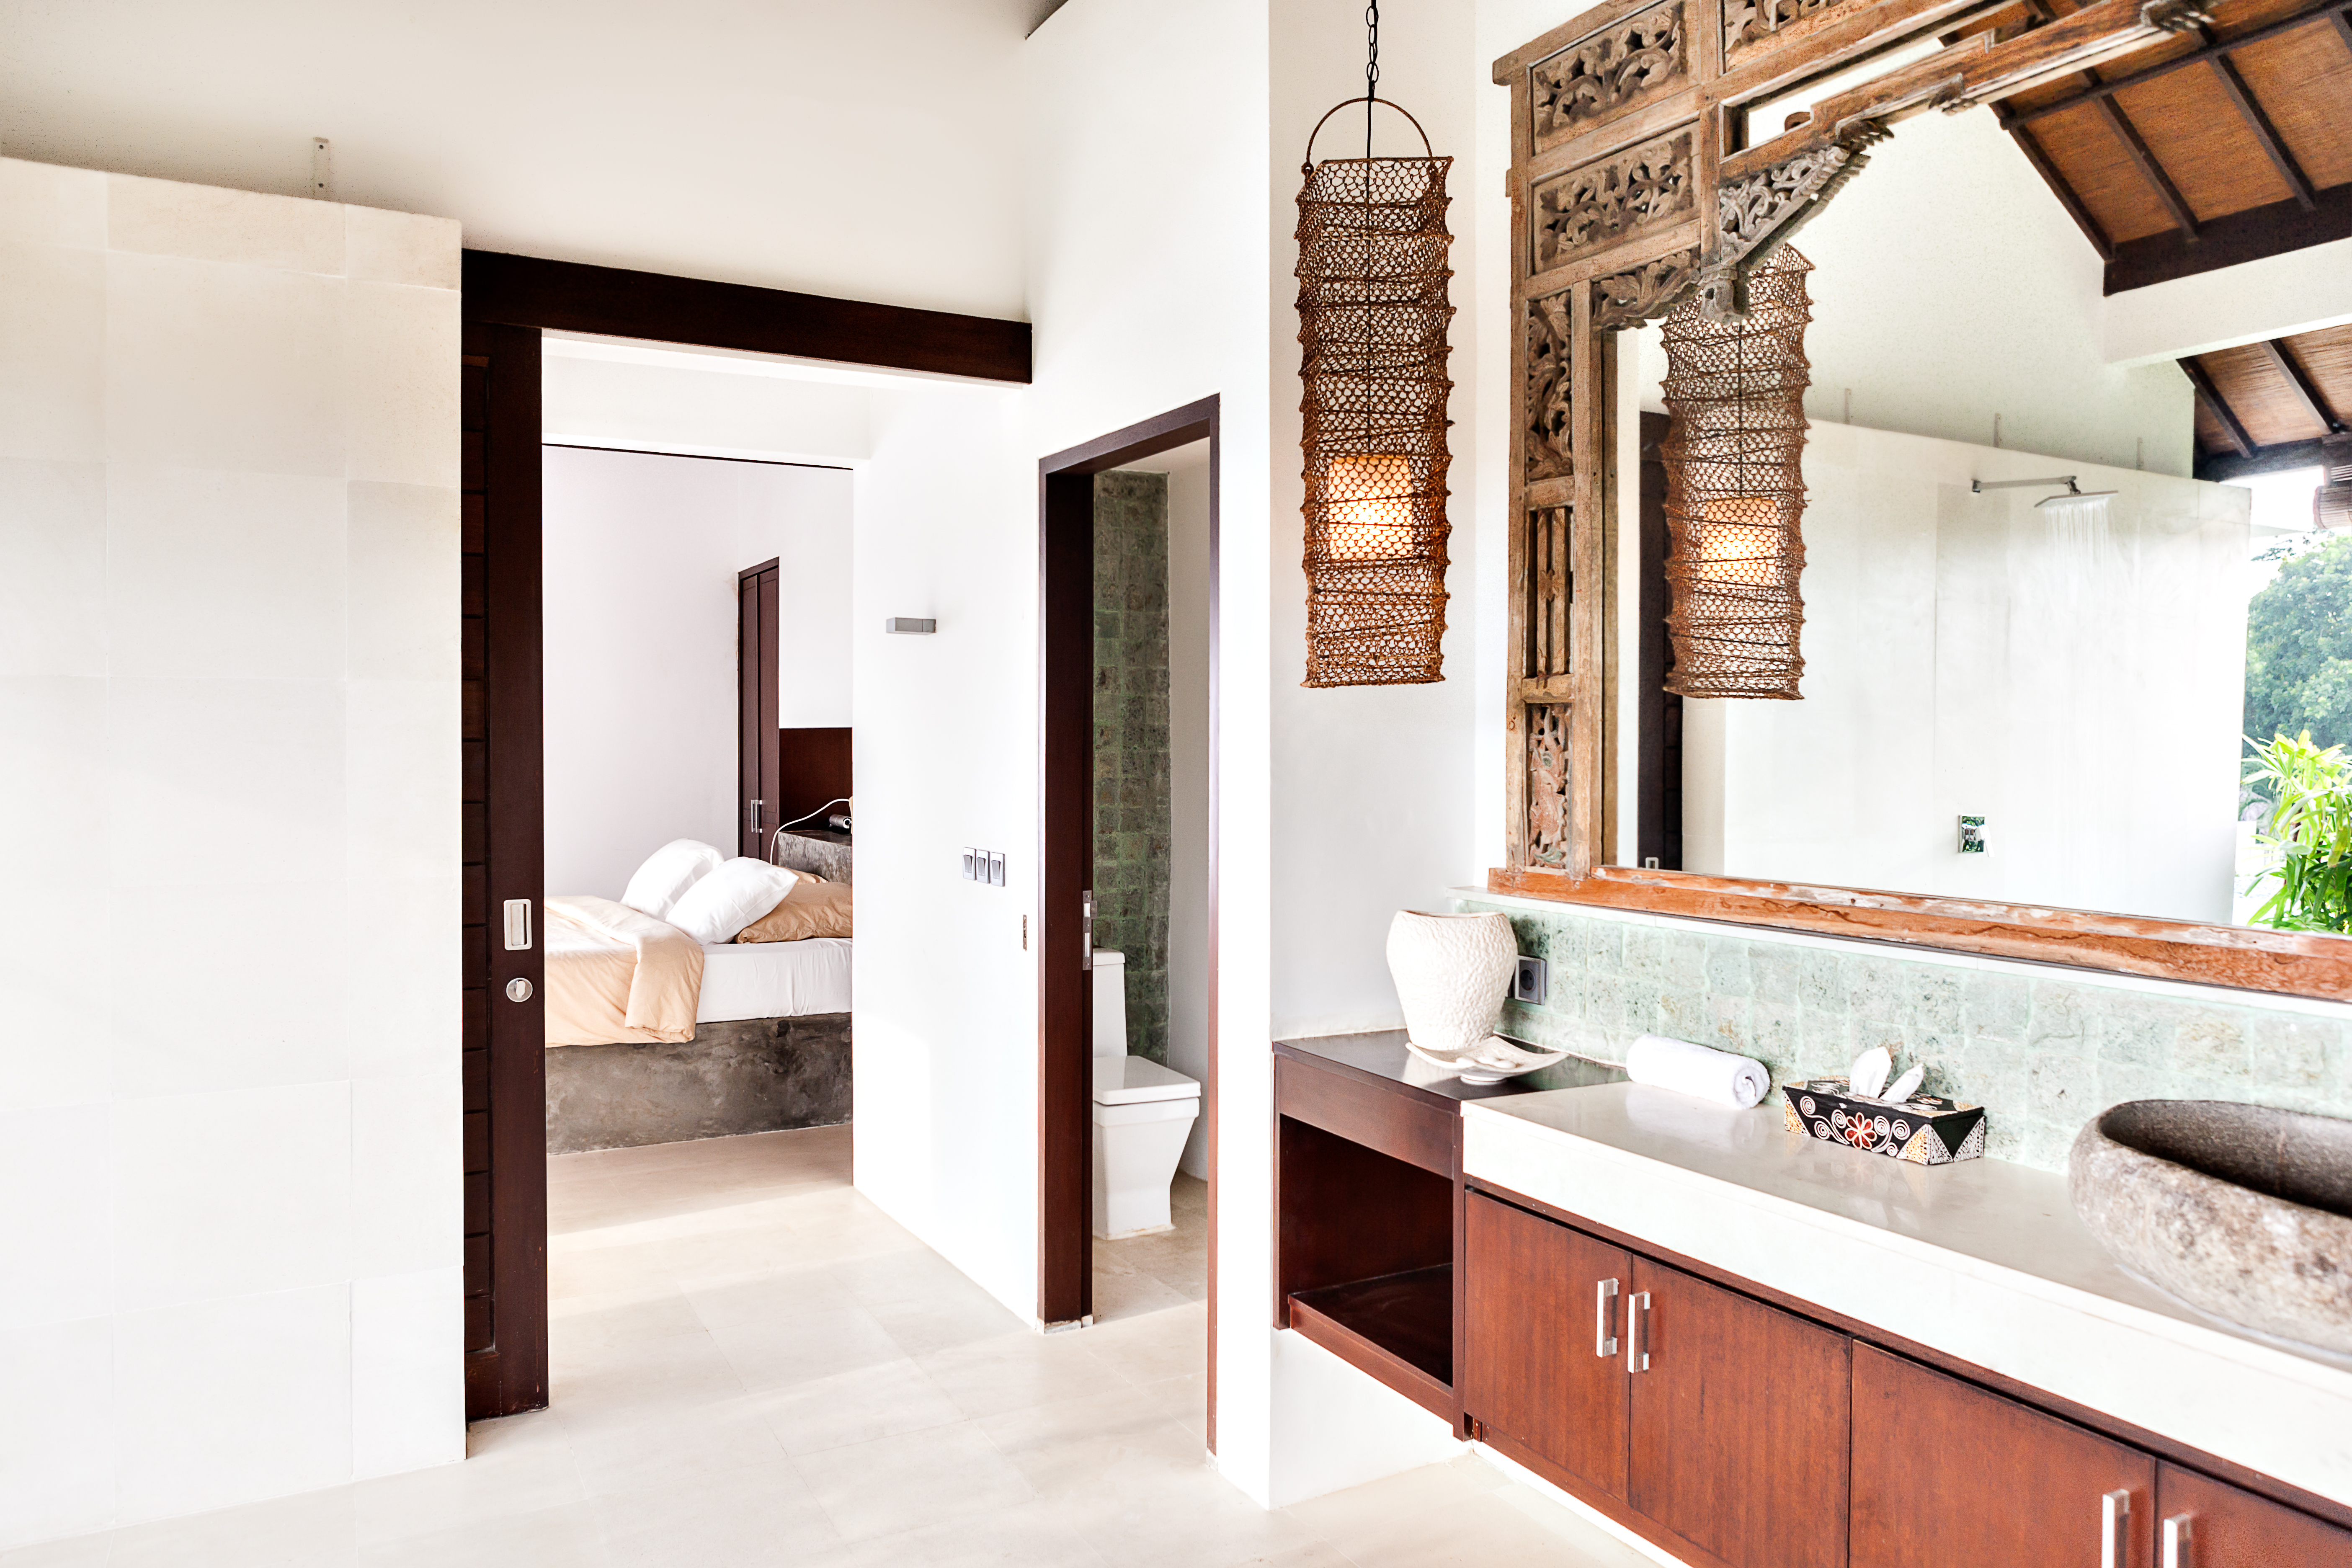 A bathroom attached to a bedroom | Source: Shutterstock